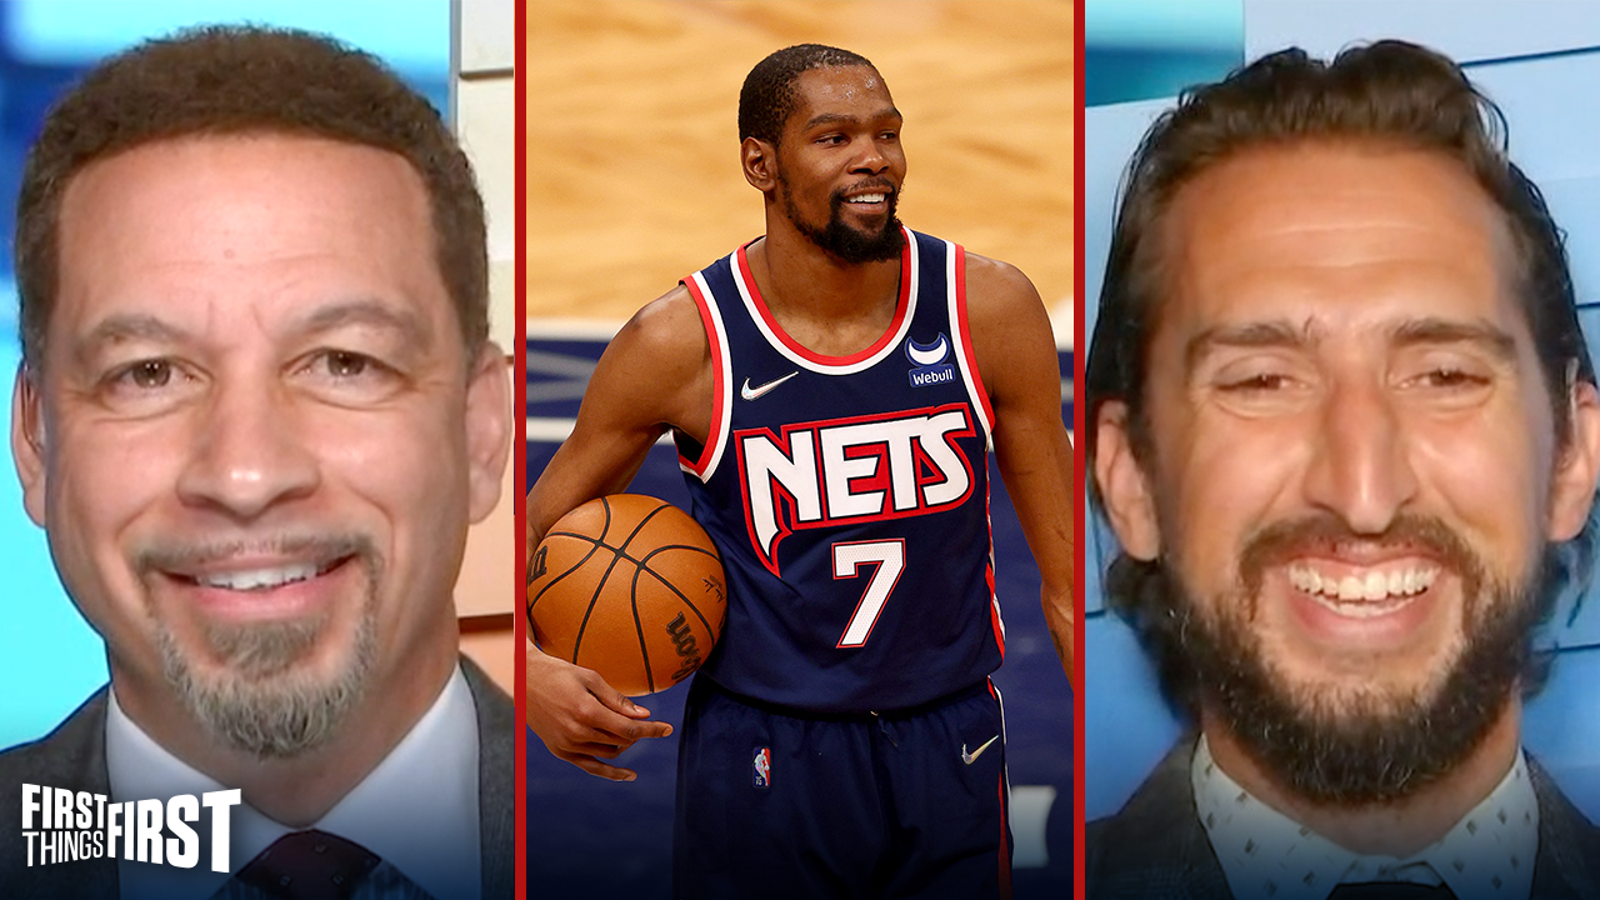 Kevin Durant's top landing spots, according to Nick Wright